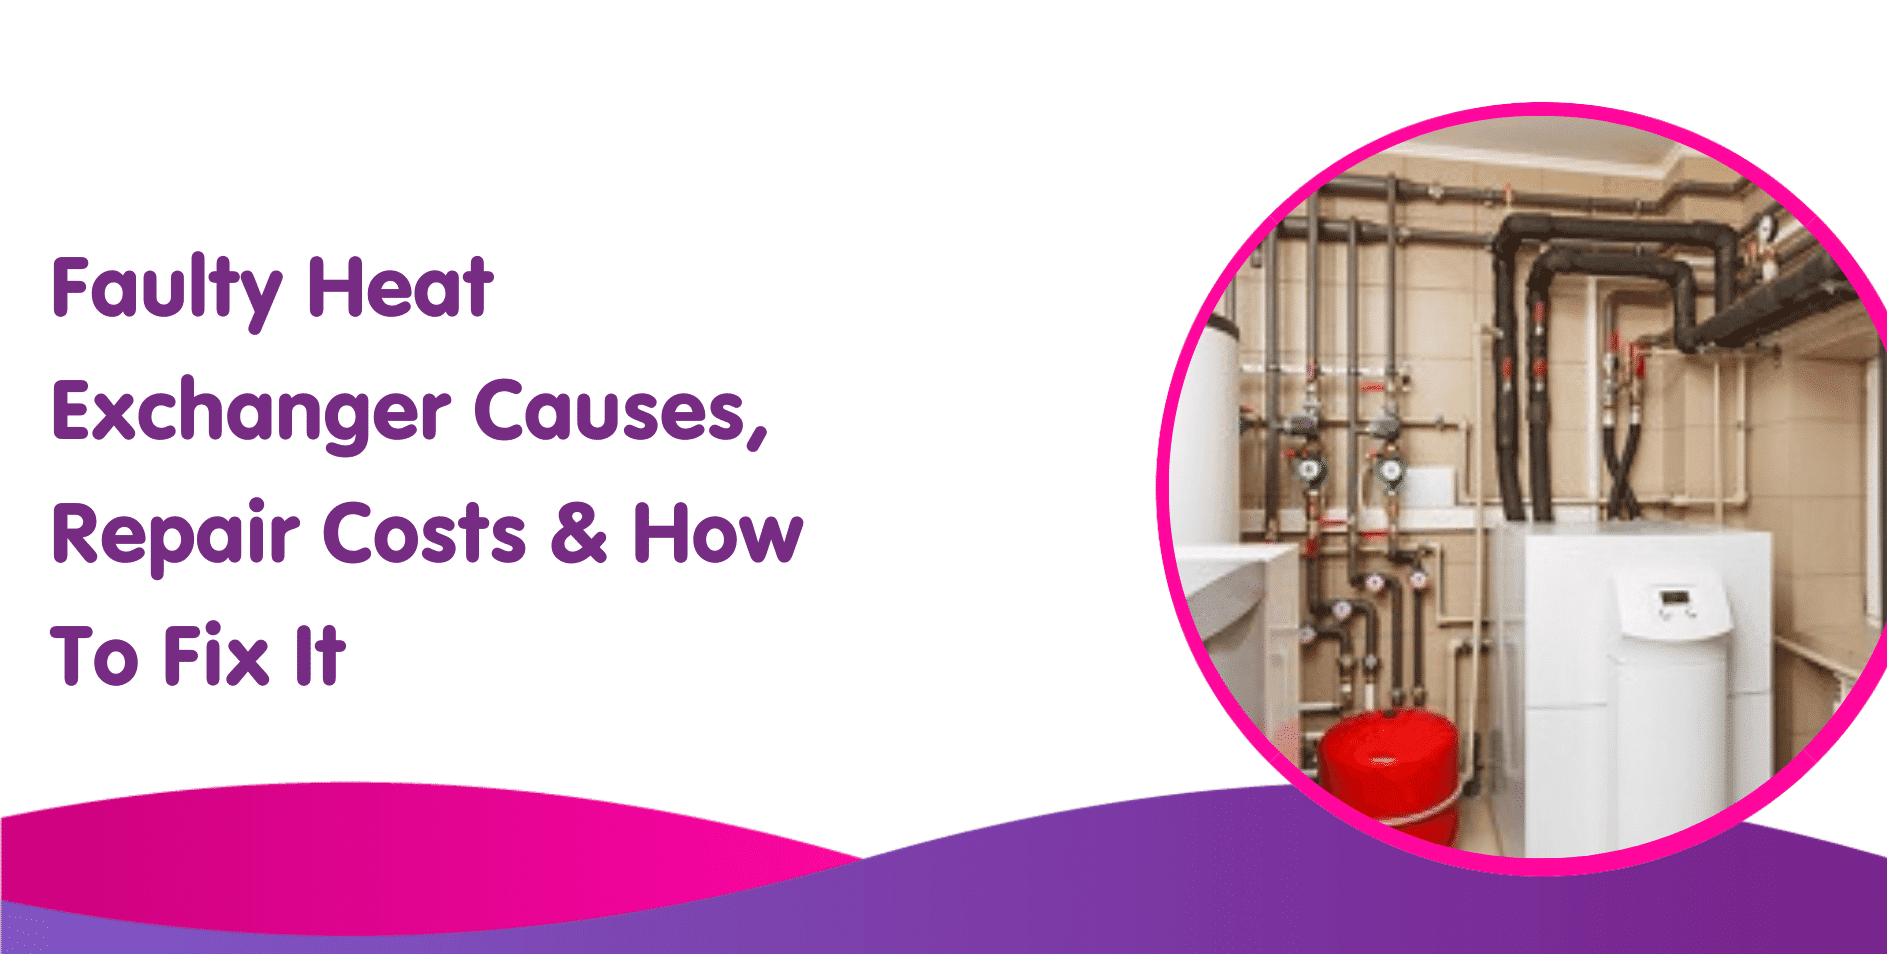 Faulty Heat Exchanger Causes, Repair Costs & How To Fix It